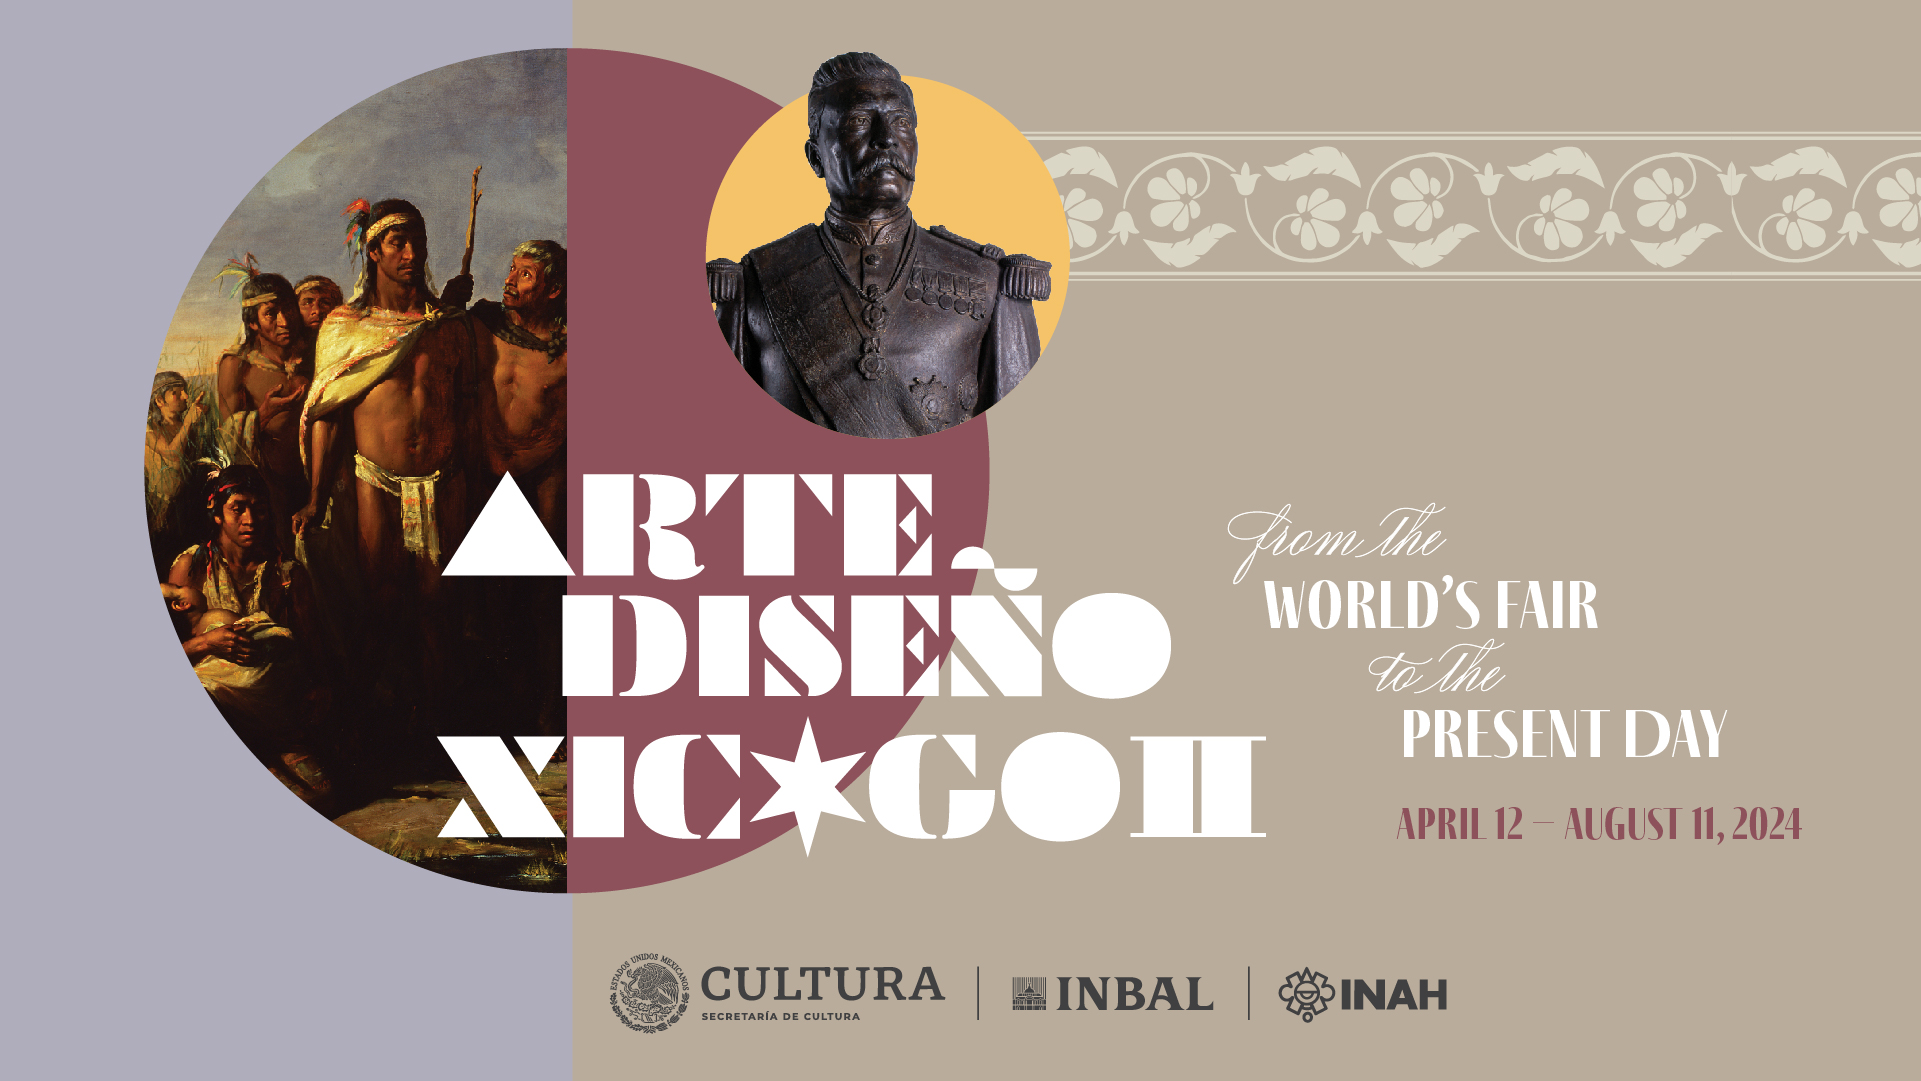 Exhibition graphic that says: "Arte Diseño Xicágo II – From the World’s Fair to the Present Day"